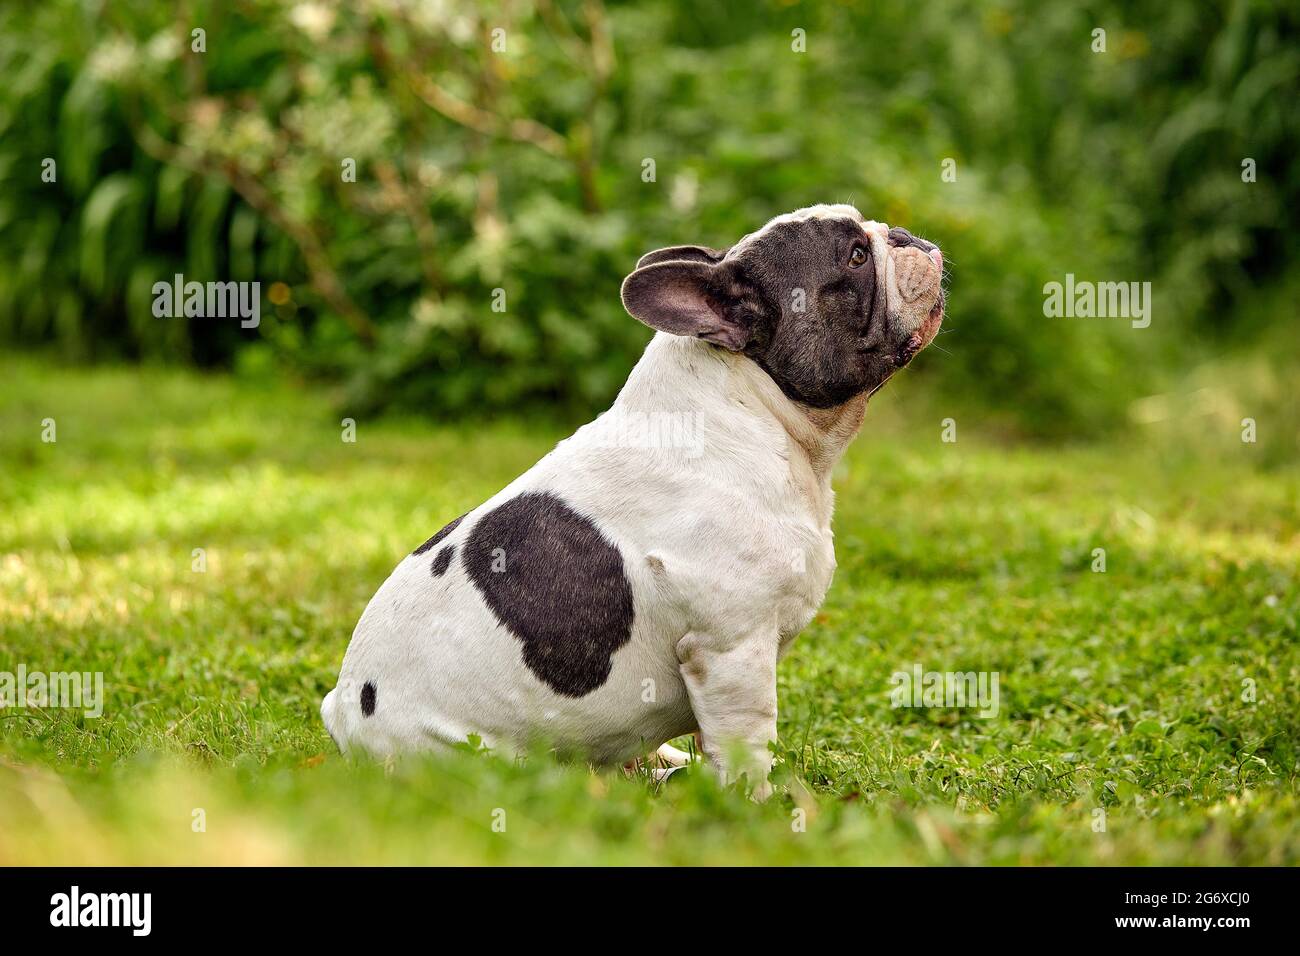 A disgruntled French bulldog sits on a green lawn, turning away from the camera dreaming, copy space Stock Photo